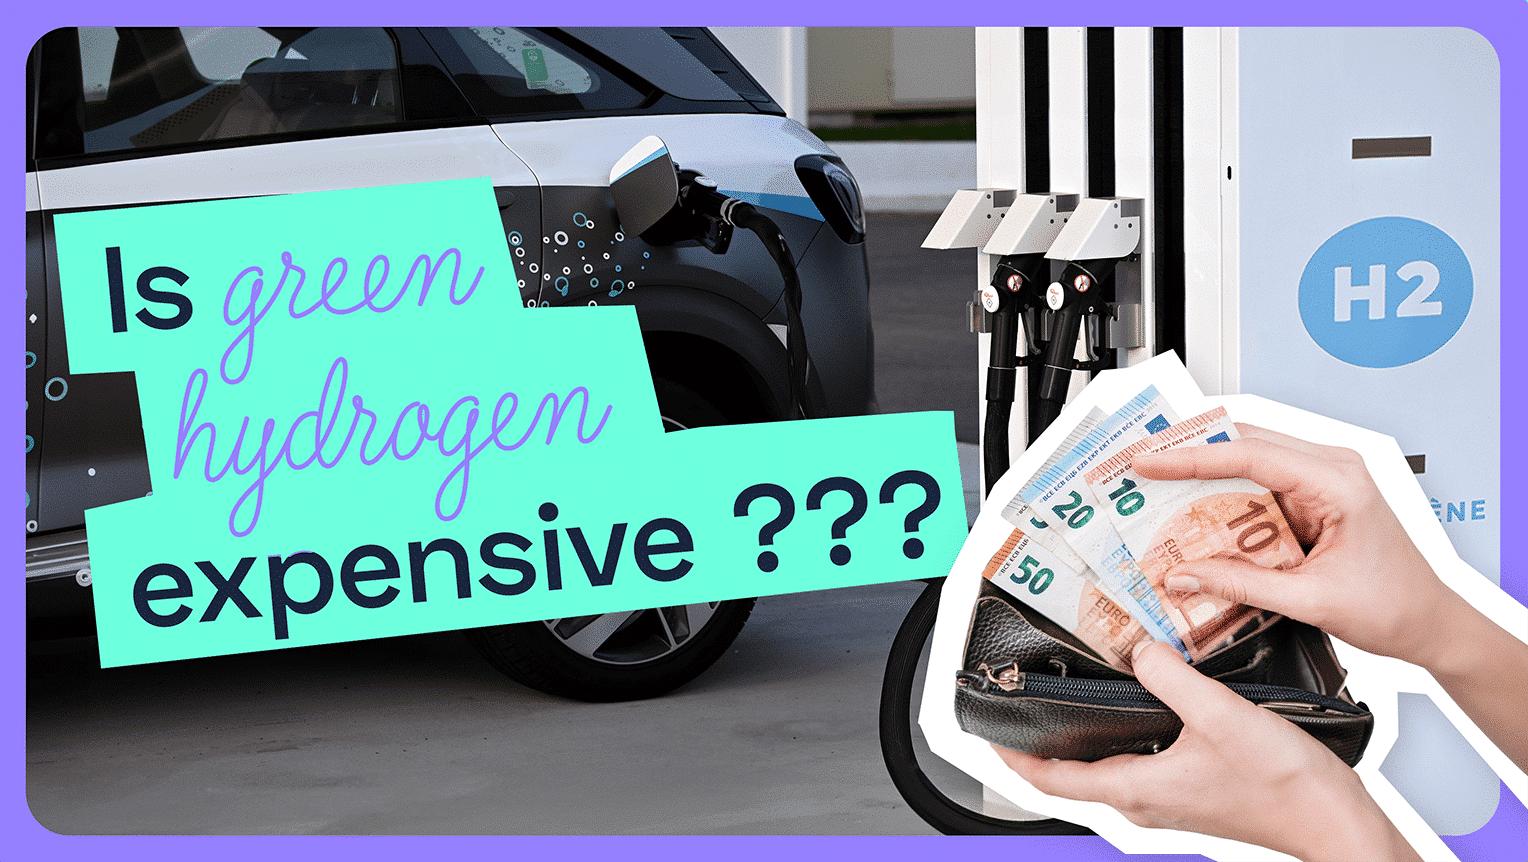 A full tank of hydrogen costs around €70, so it's cheaper than a full tank of petrol. Hello, I'm Matthieu Guesné, CEO of Lhyfe, and I'm going to talk to you about hydrogen. A full tank of hydrogen will run you 700 km for roughly €60 to €70. That's what we can afford today. Since we can produce it competitively, we can connect directly to renewable energies and then install plants that will enable us to achieve economies of scale quickly enough to produce it centrally and then distribute it to points of consumption. If we build large enough plants, we can produce hydrogen at a competitive price and deliver it to a large number of service stations. A large city like Paris, like Toulouse, can very easily afford its own hydrogen production unit. But what we're doing at Lhyfe is avoiding this ecological divide by producing our hydrogen centrally but regionally. One production site per region to supply everyone in the region. You have 411 service stations on motorway service areas, and a hydrogen station costs roughly one million euros, which means that for 400 million euros you could have a complete network of service stations in France. But in fact, out of a 9 billion French plan, it's nothing at all, so it's fast and it's cheap.